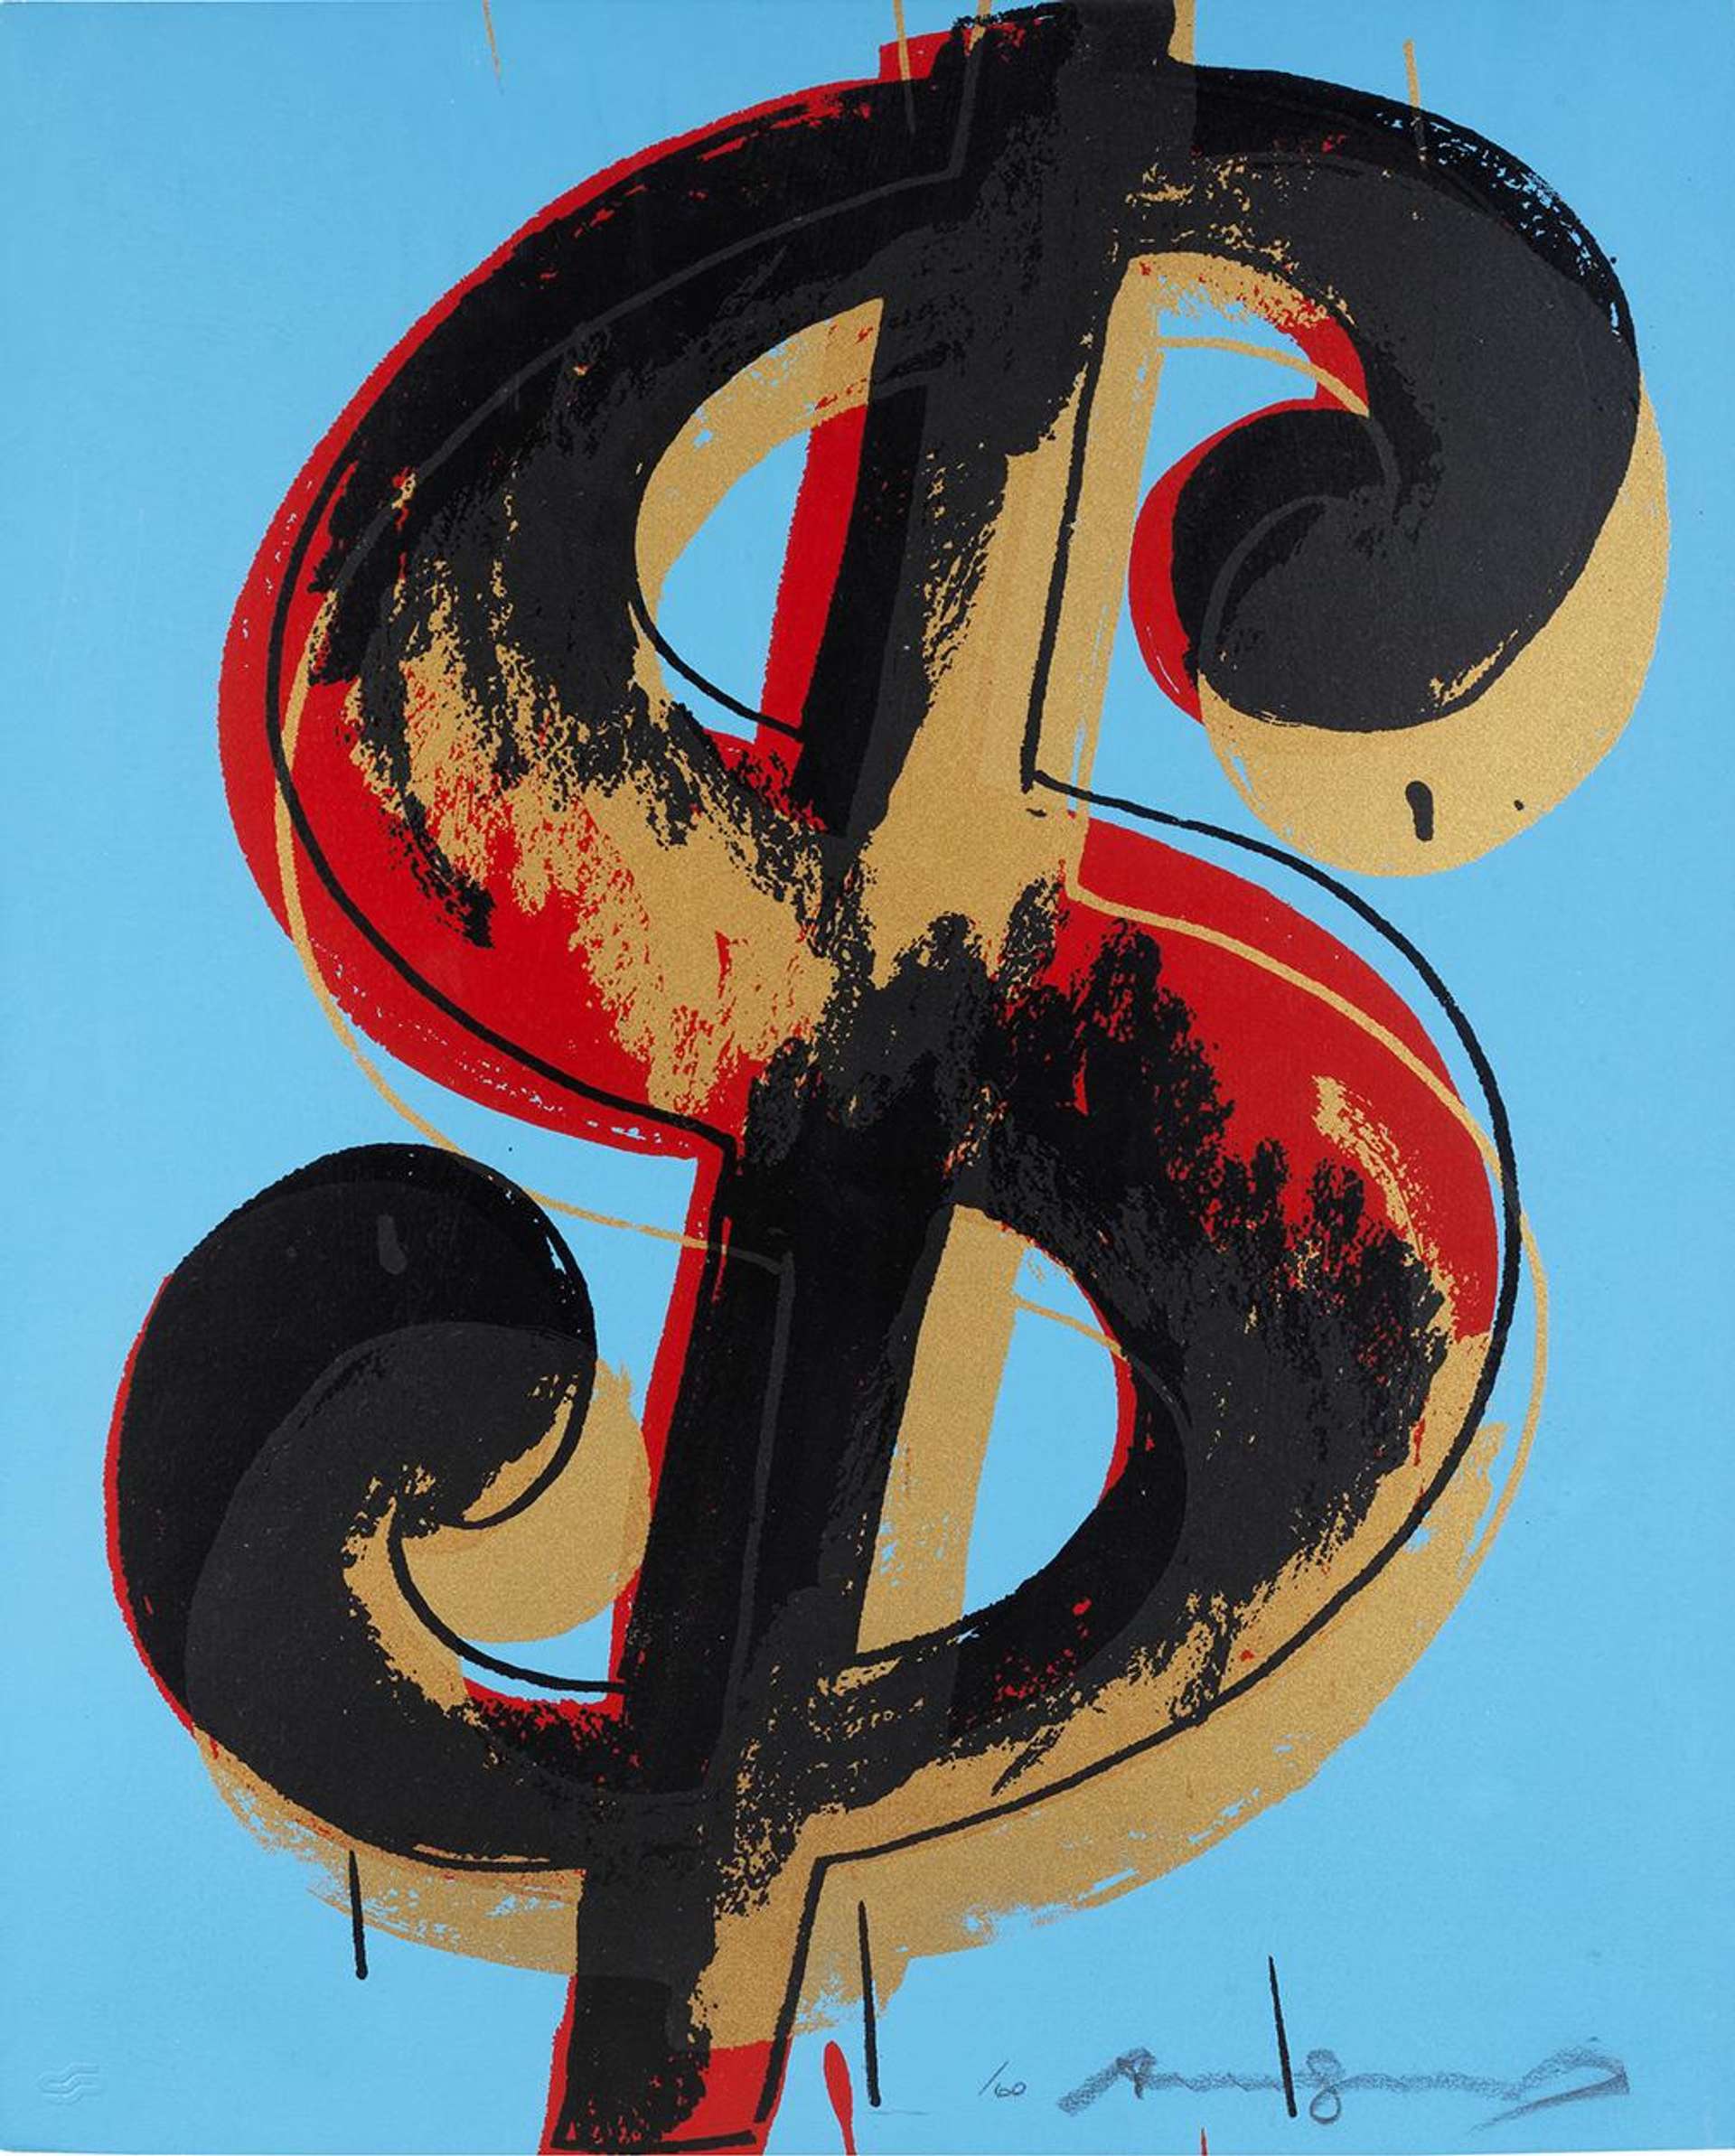 A screnprint by Andy Warhol depicting a black, yellow, and red dollar sign against a light blue background.